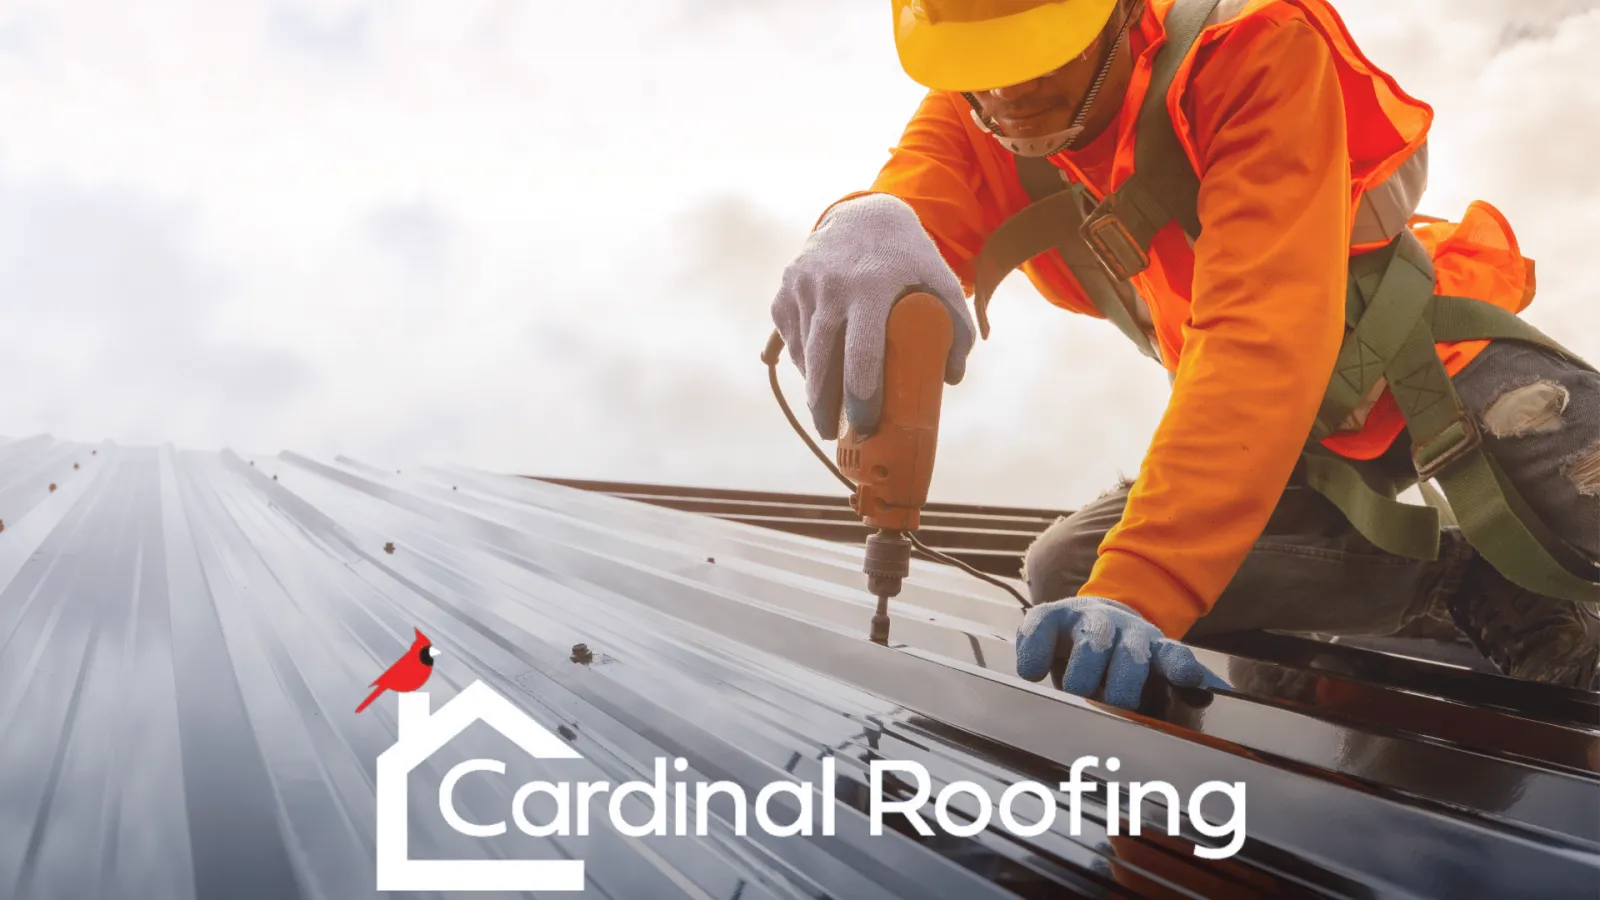 Cardinal Roofing poster of worker drilling metal roof piece 